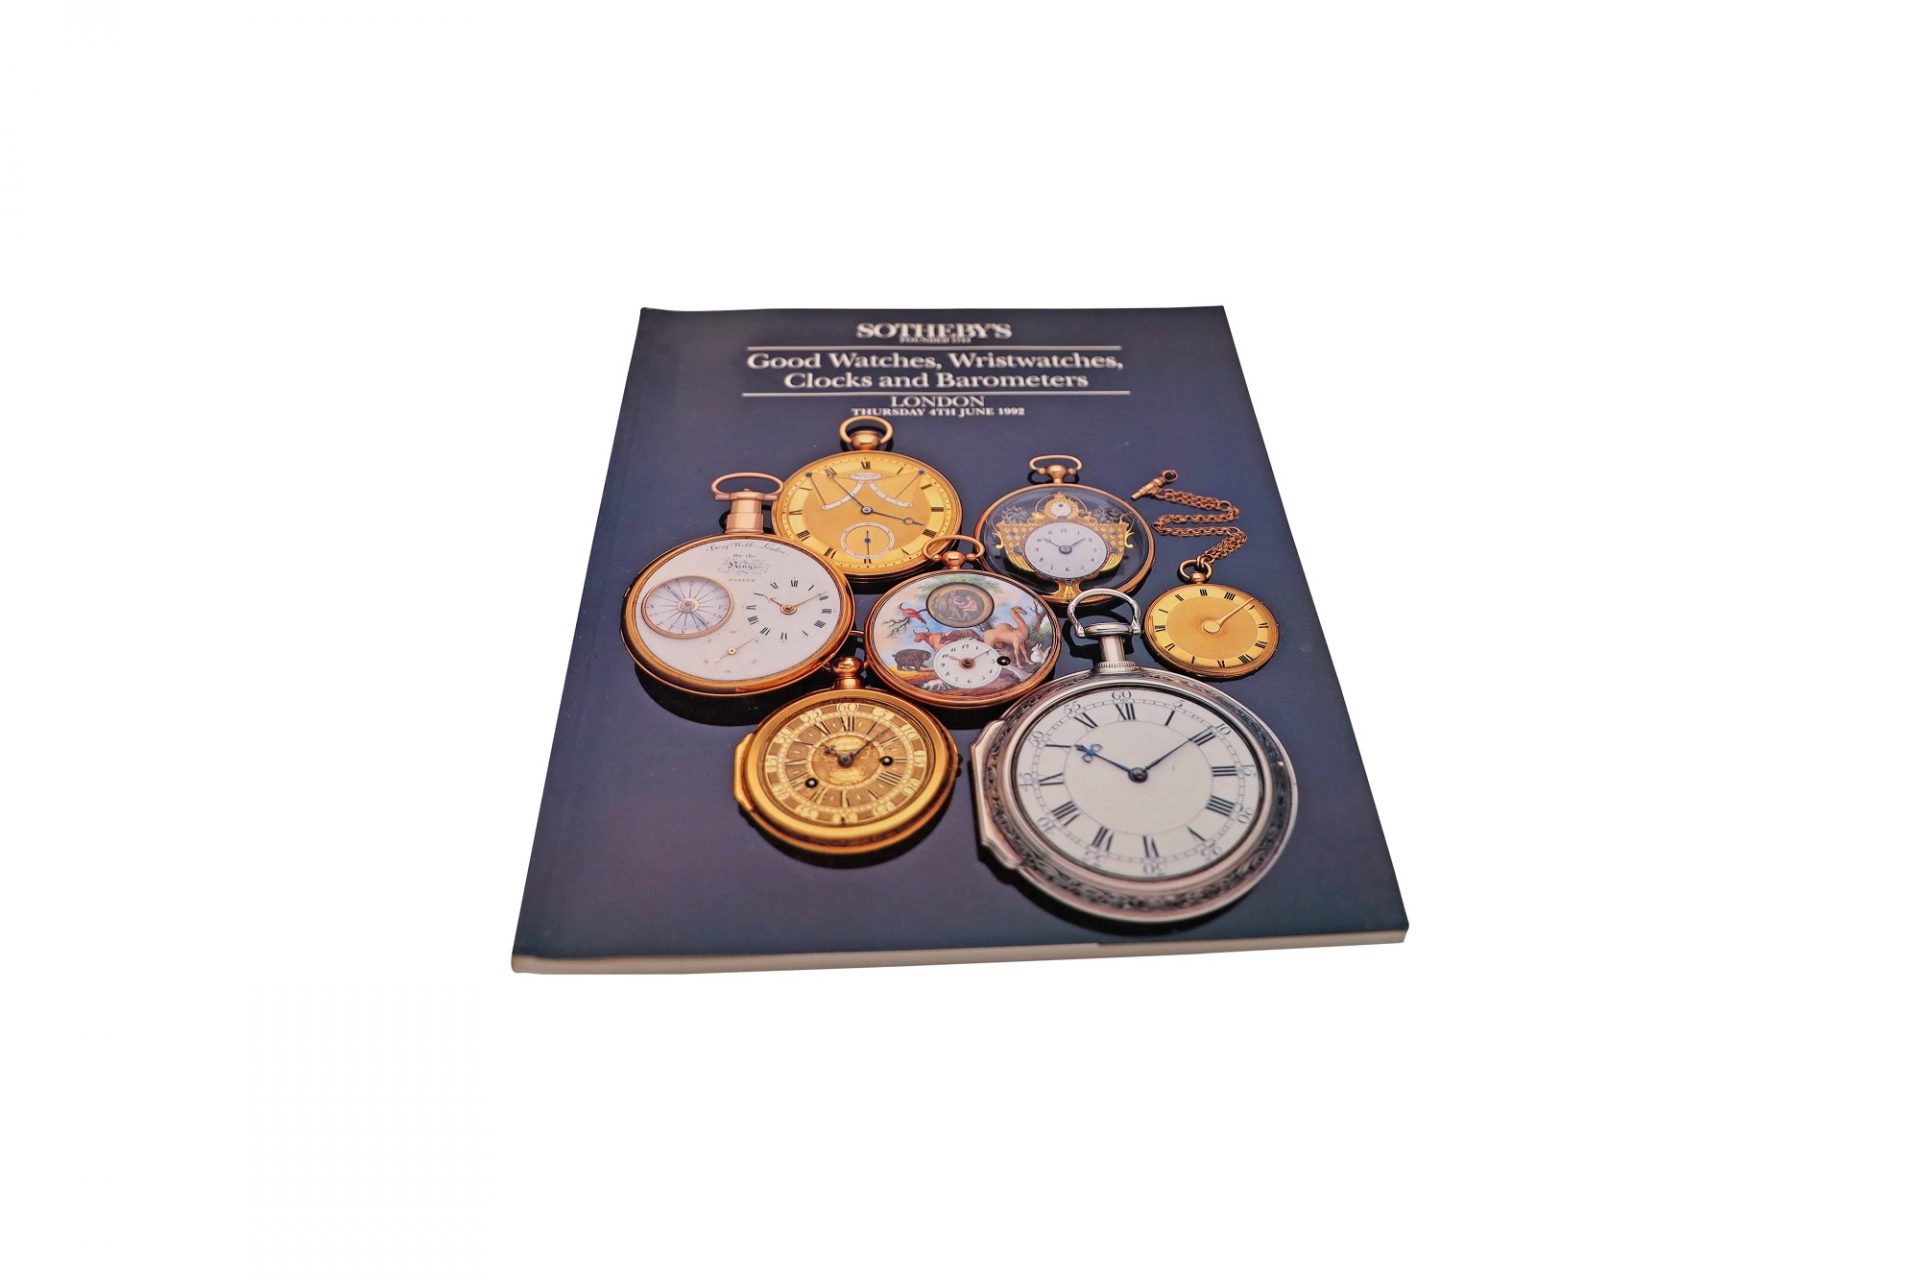 Sotheby's Good Watches, Wristwatches, Clocks And Barometers Landon June 4, 1992 Auction Catalog - Rare Watch Parts